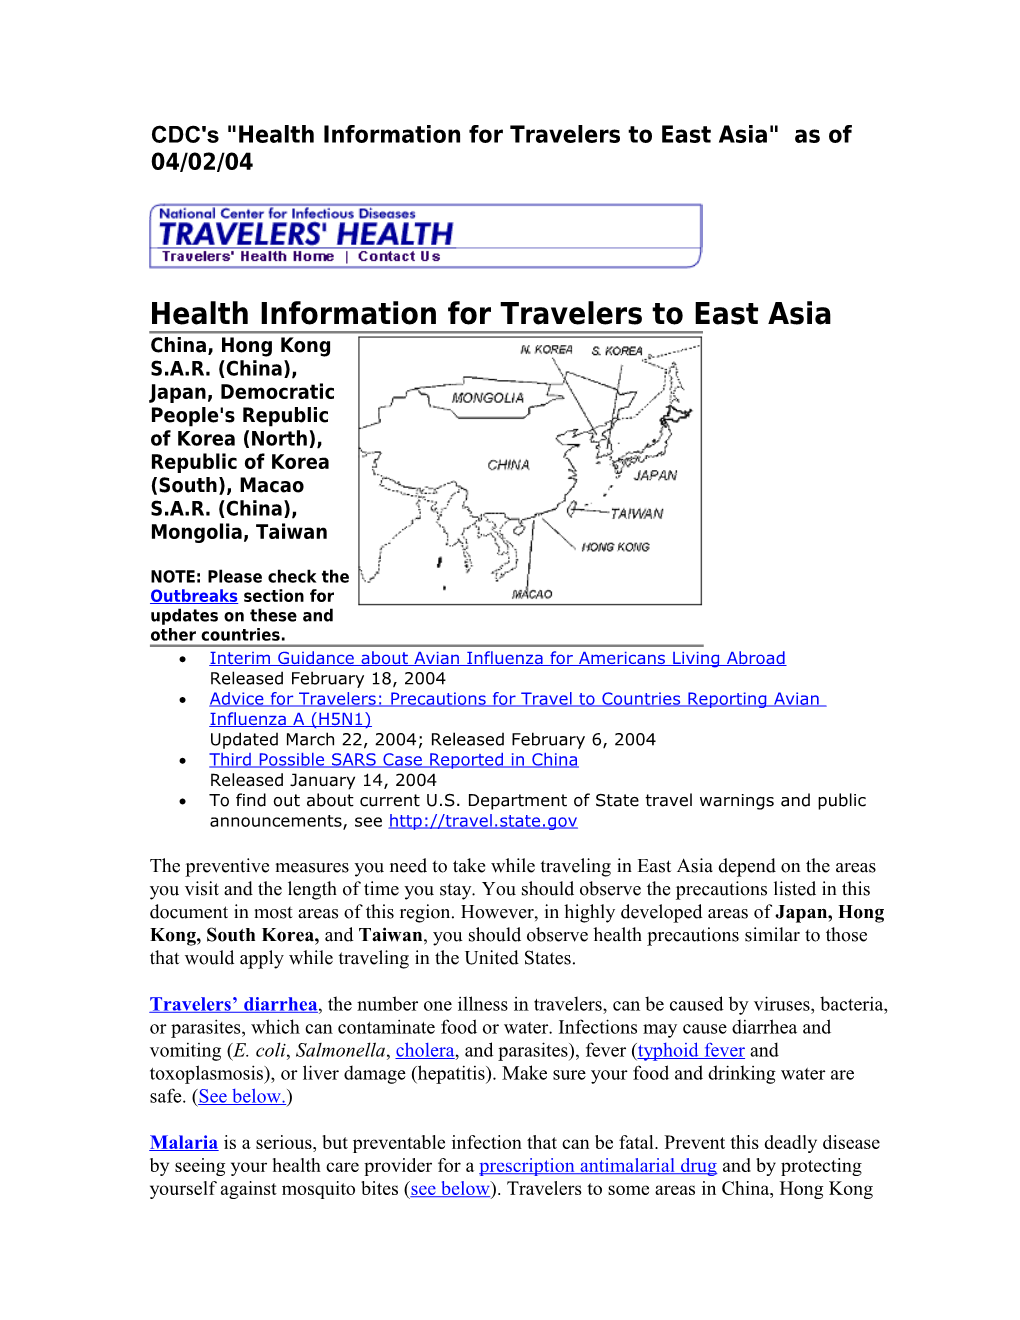 CDC's Health Information for Travelers to East Asia